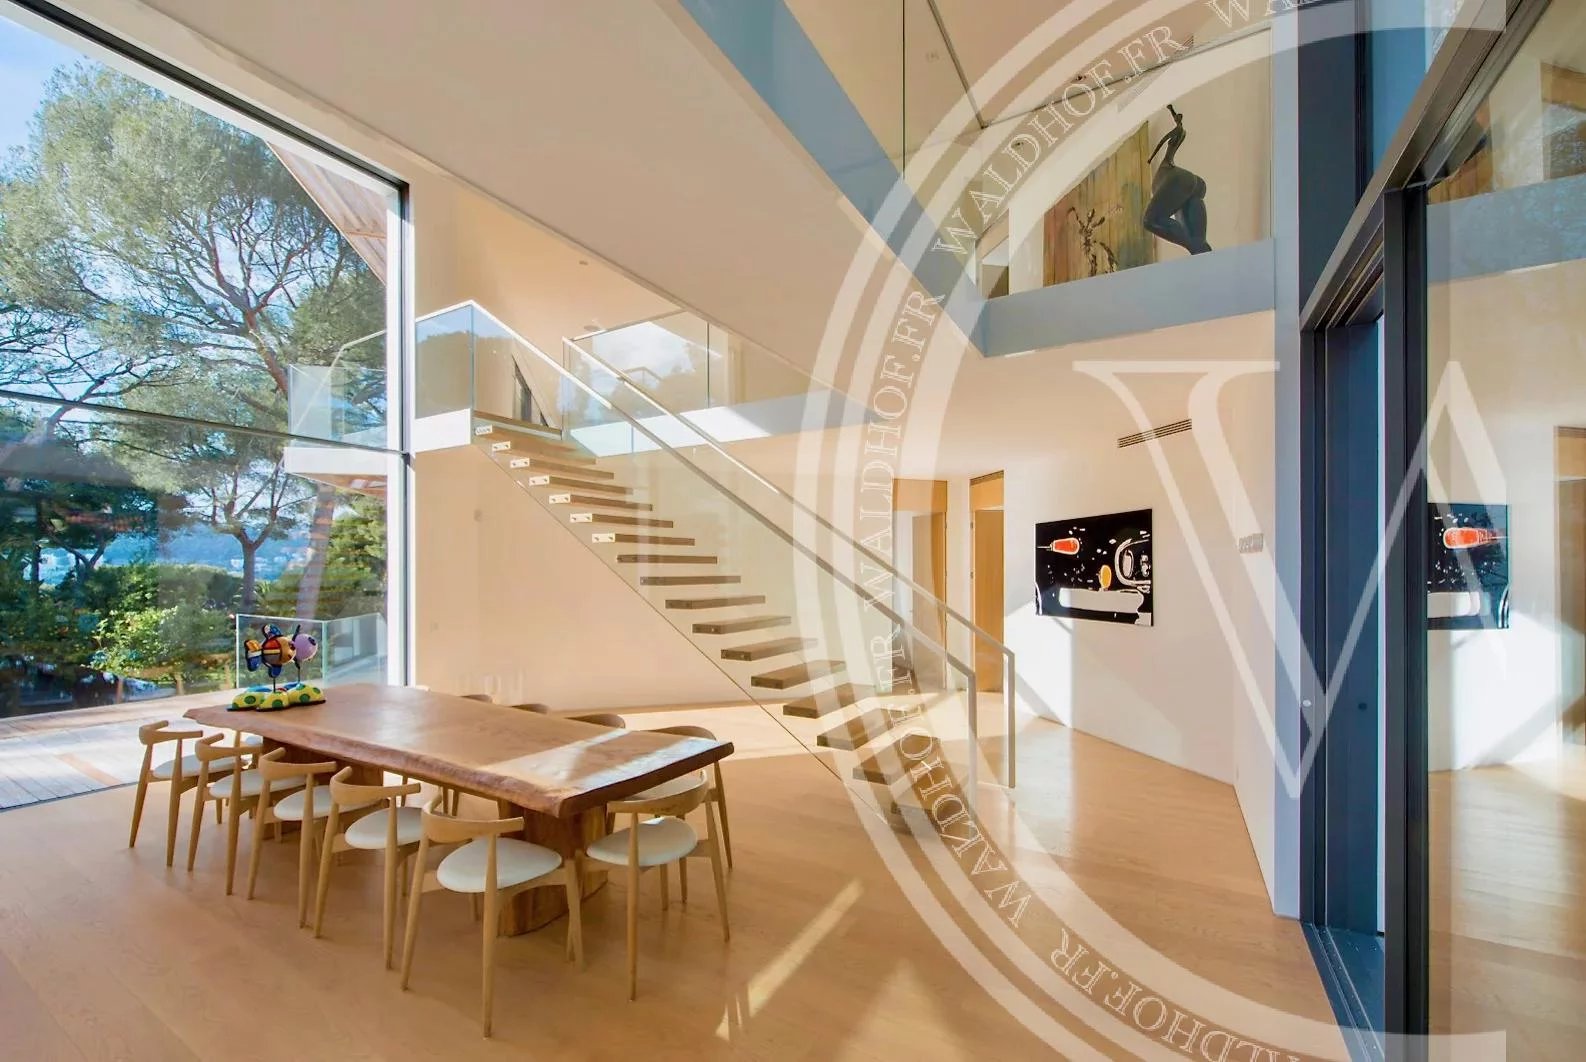 Newly built contemporary masterpiece by world famous architect